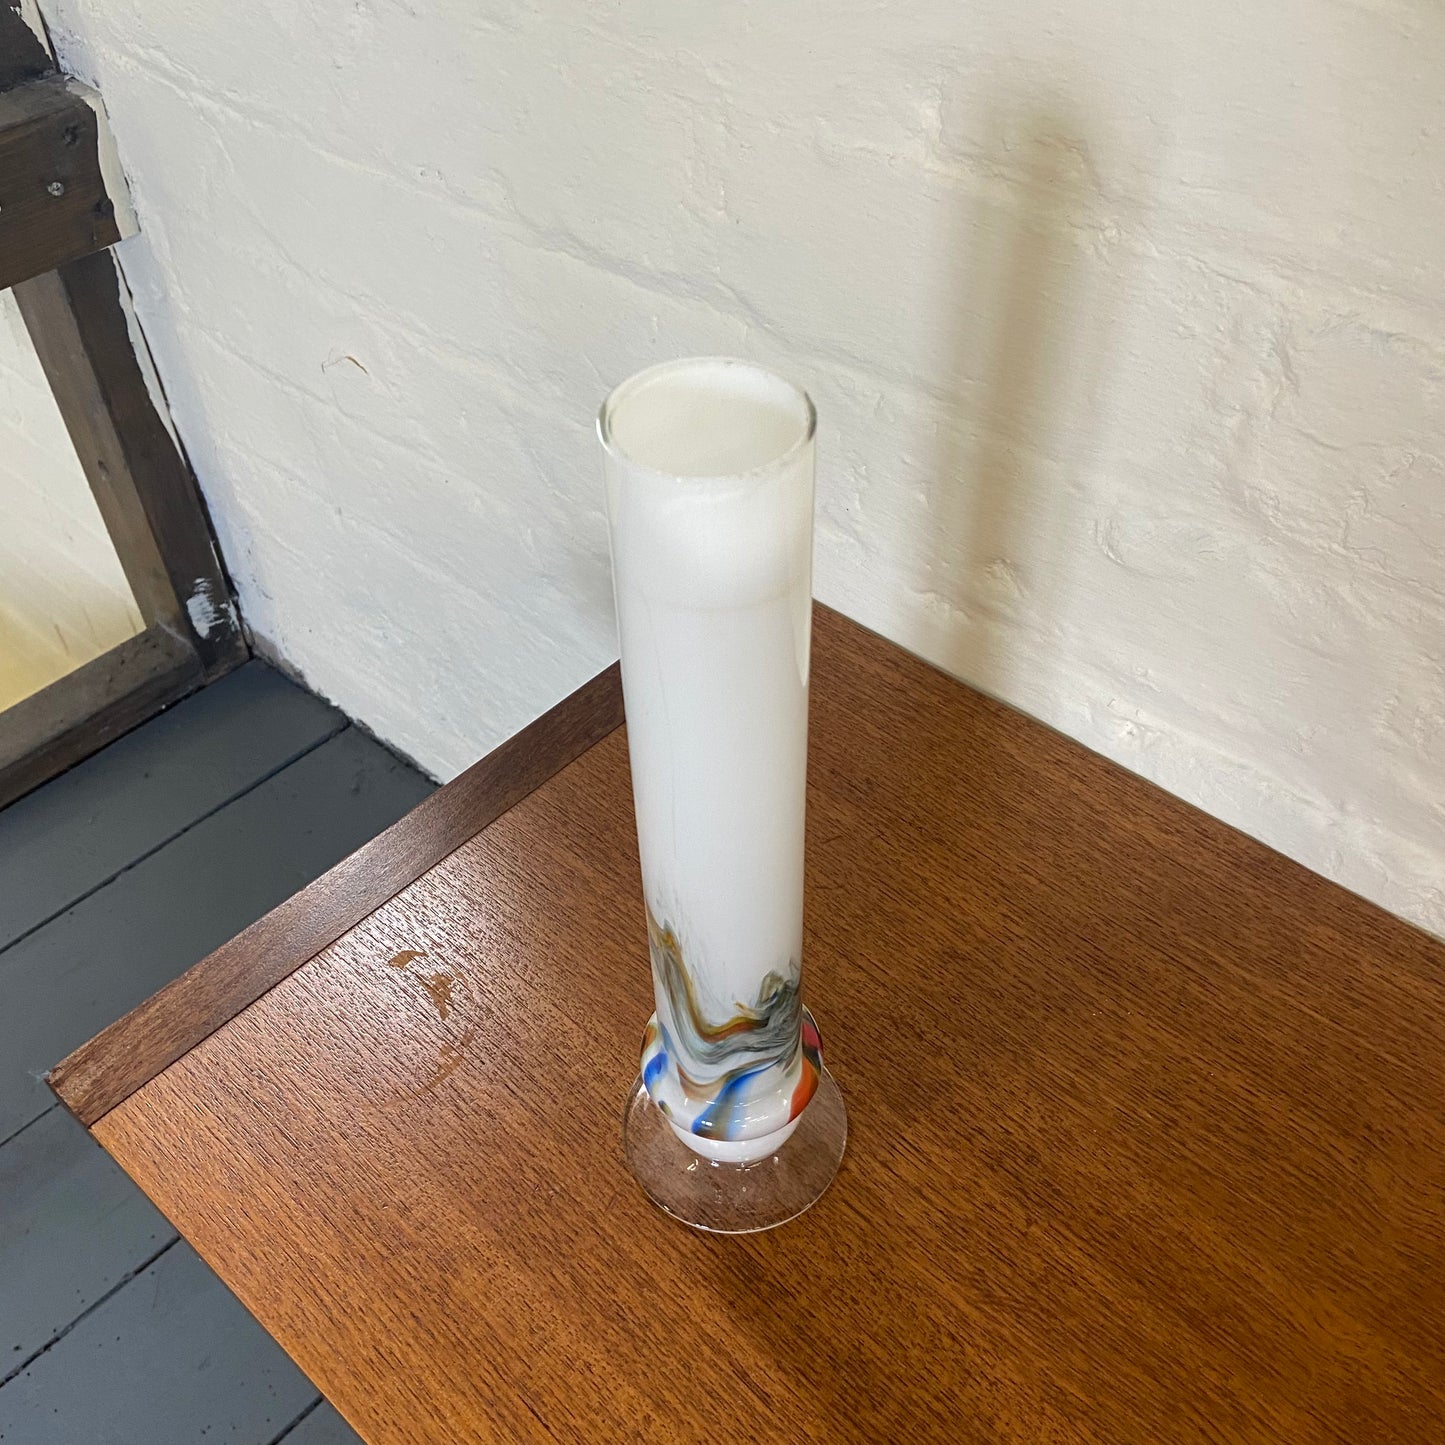 Marble Effect Opaque Glass Vase